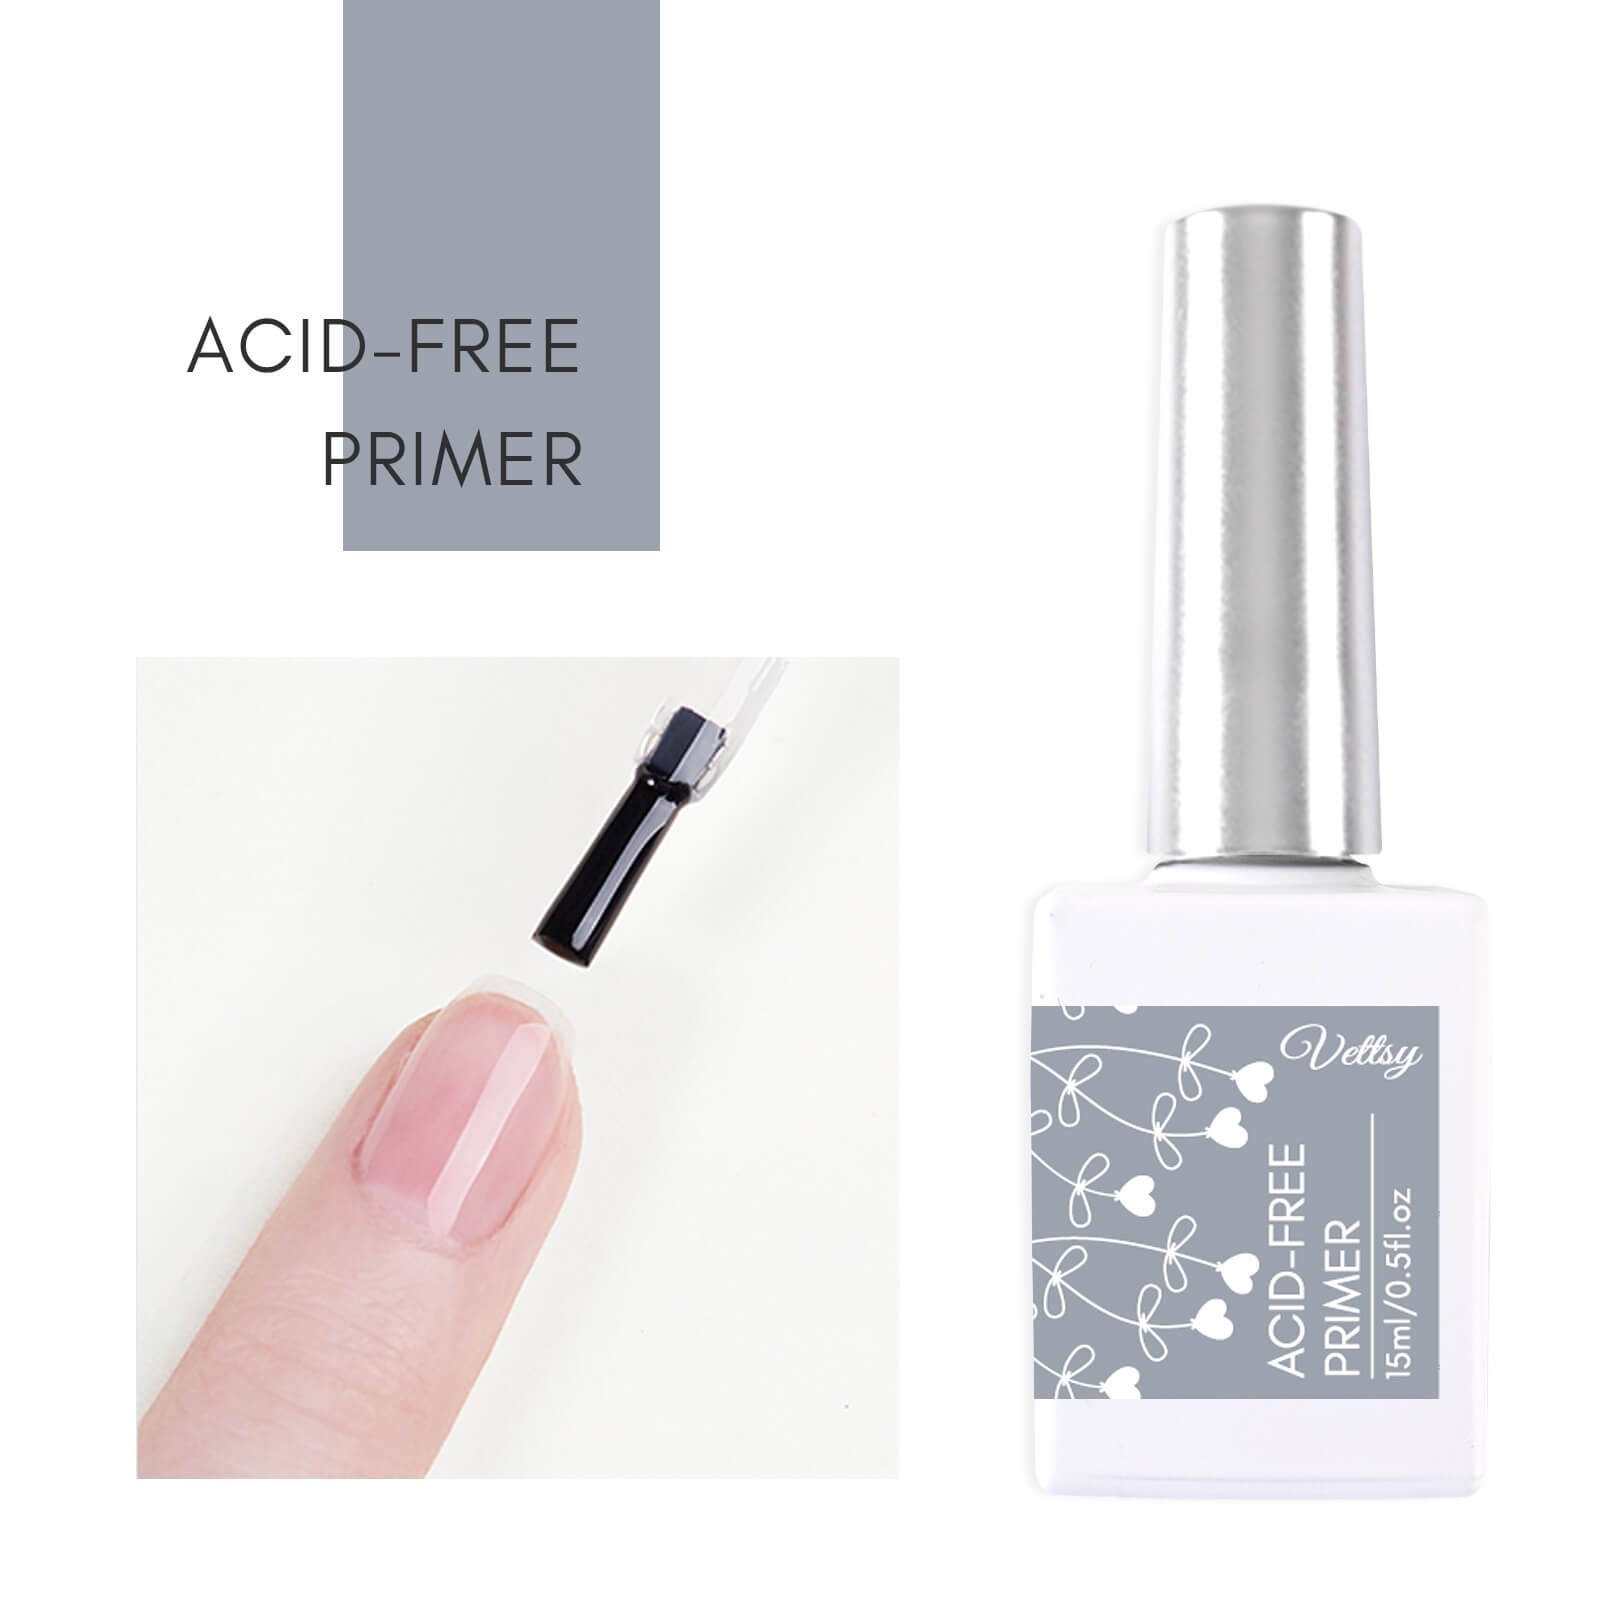 Nail Primer For Acrylic Nails, Acid Free No Burn 0.5 oz by Cacee, Low Odor,  Polish for UV/LED, Use On Natural Nails Before Color Gel Polish 